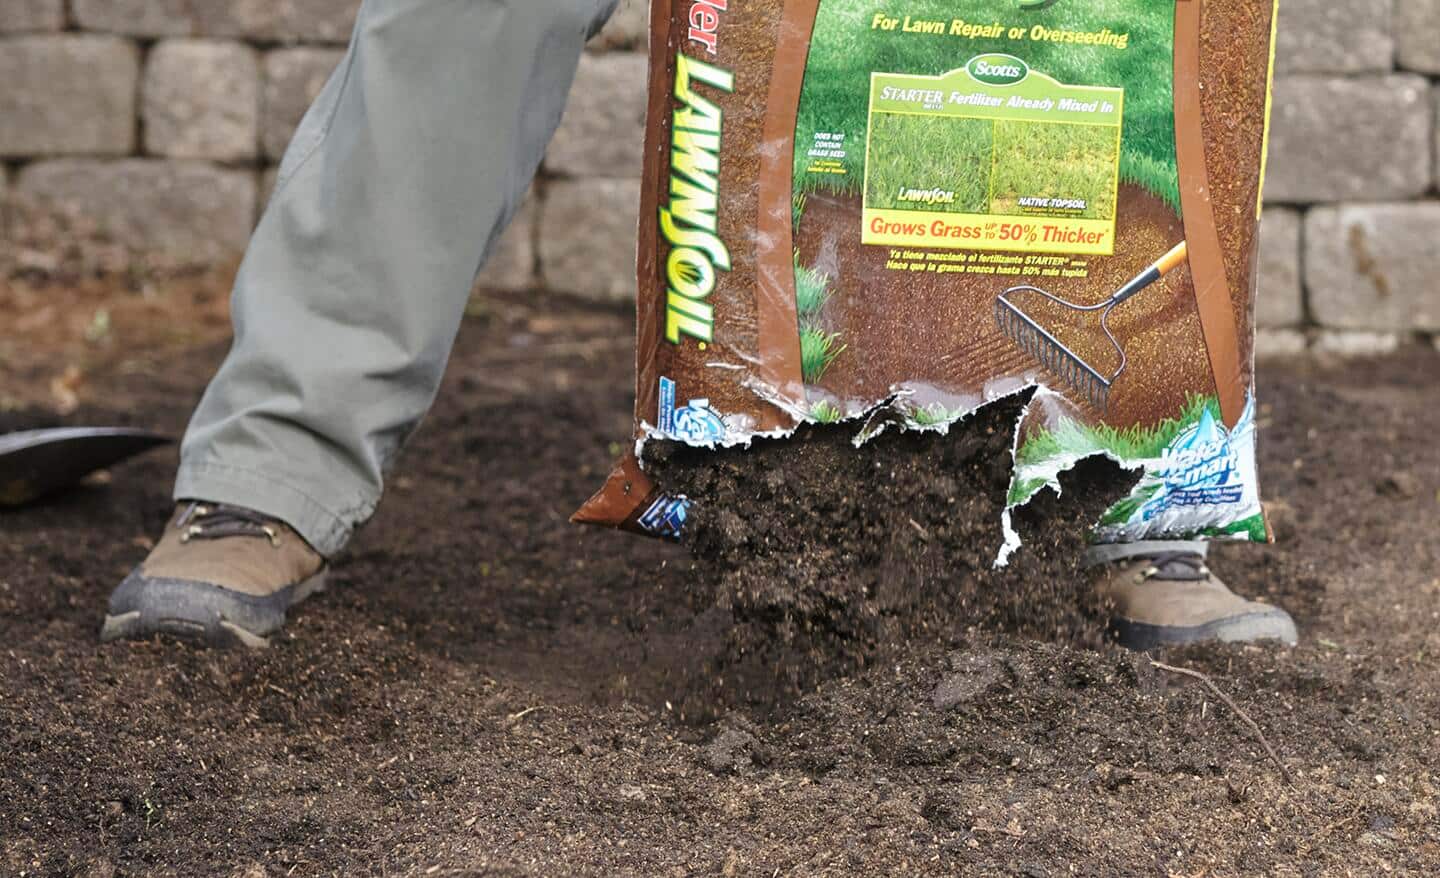 A person adds topsoil to a shallow hole in outdoor soil.